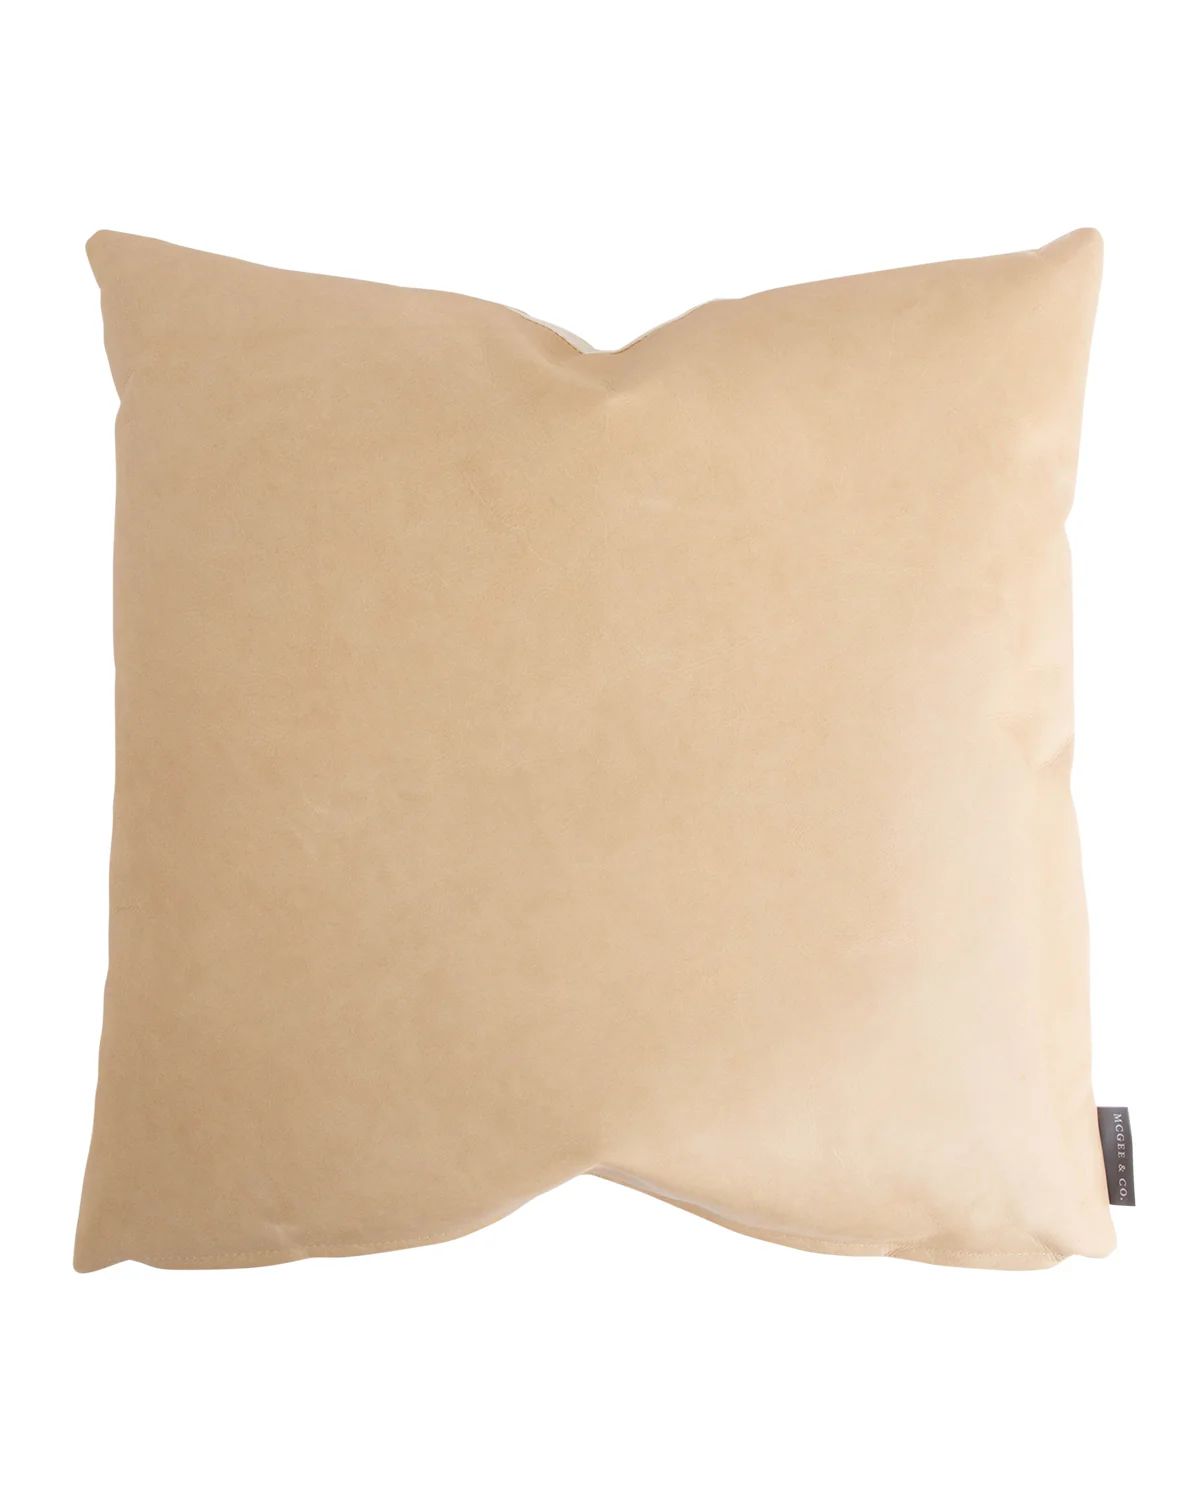 Palomino Leather Pillow | McGee & Co.